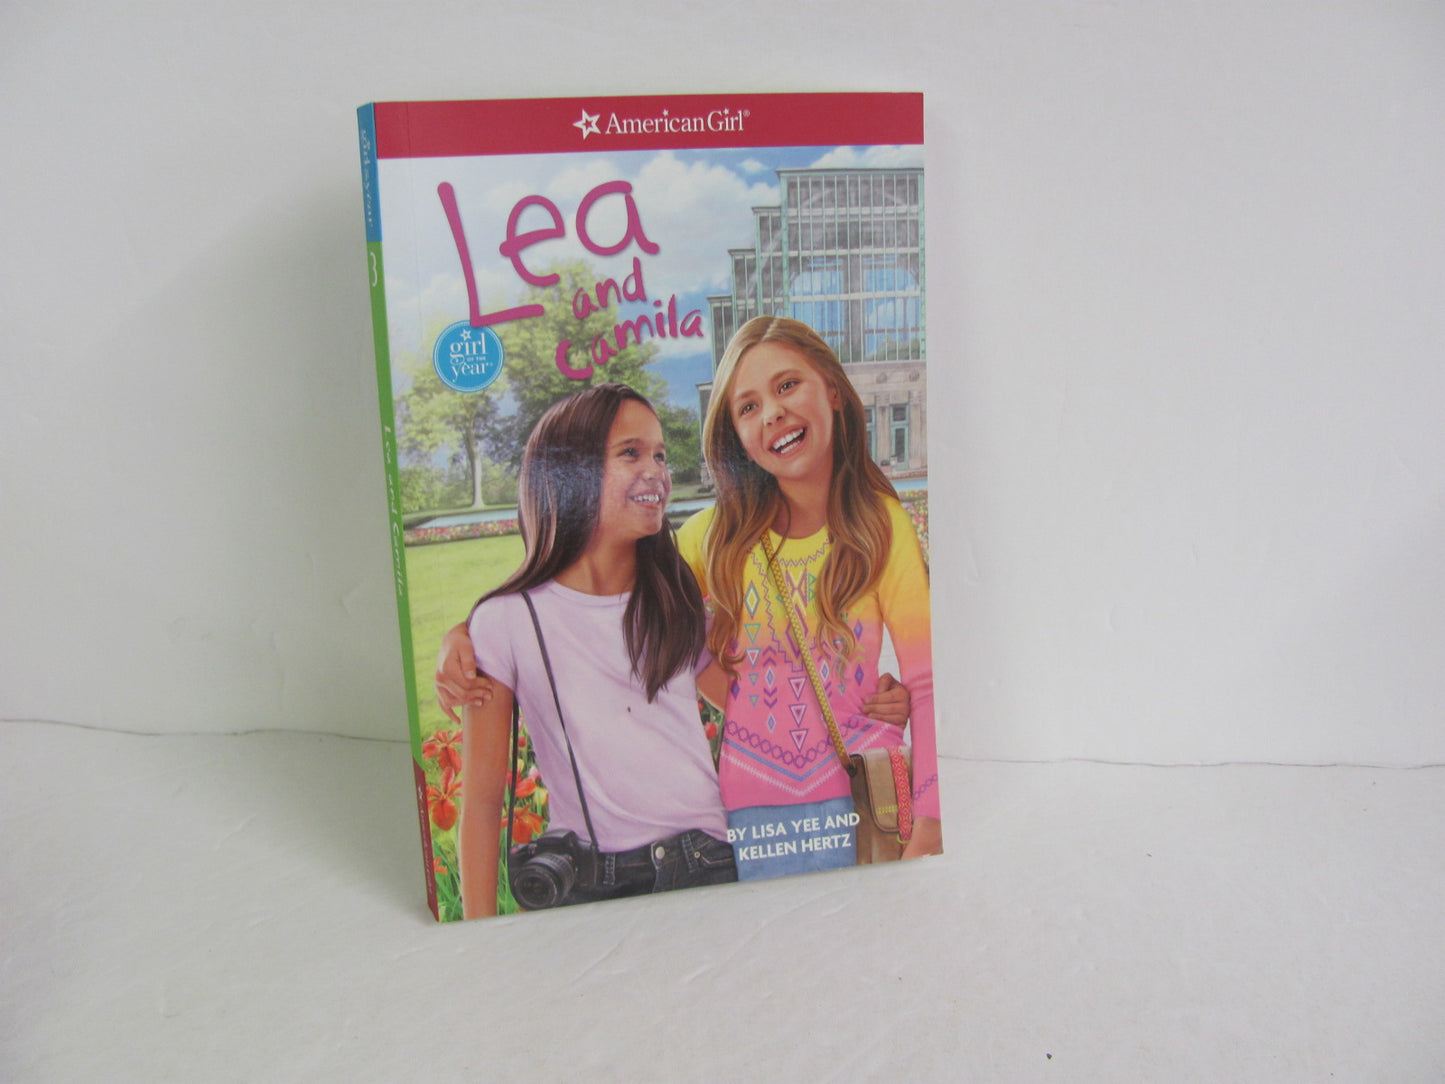 Lea and Camila American Girl Pre-Owned Yee Fiction Books